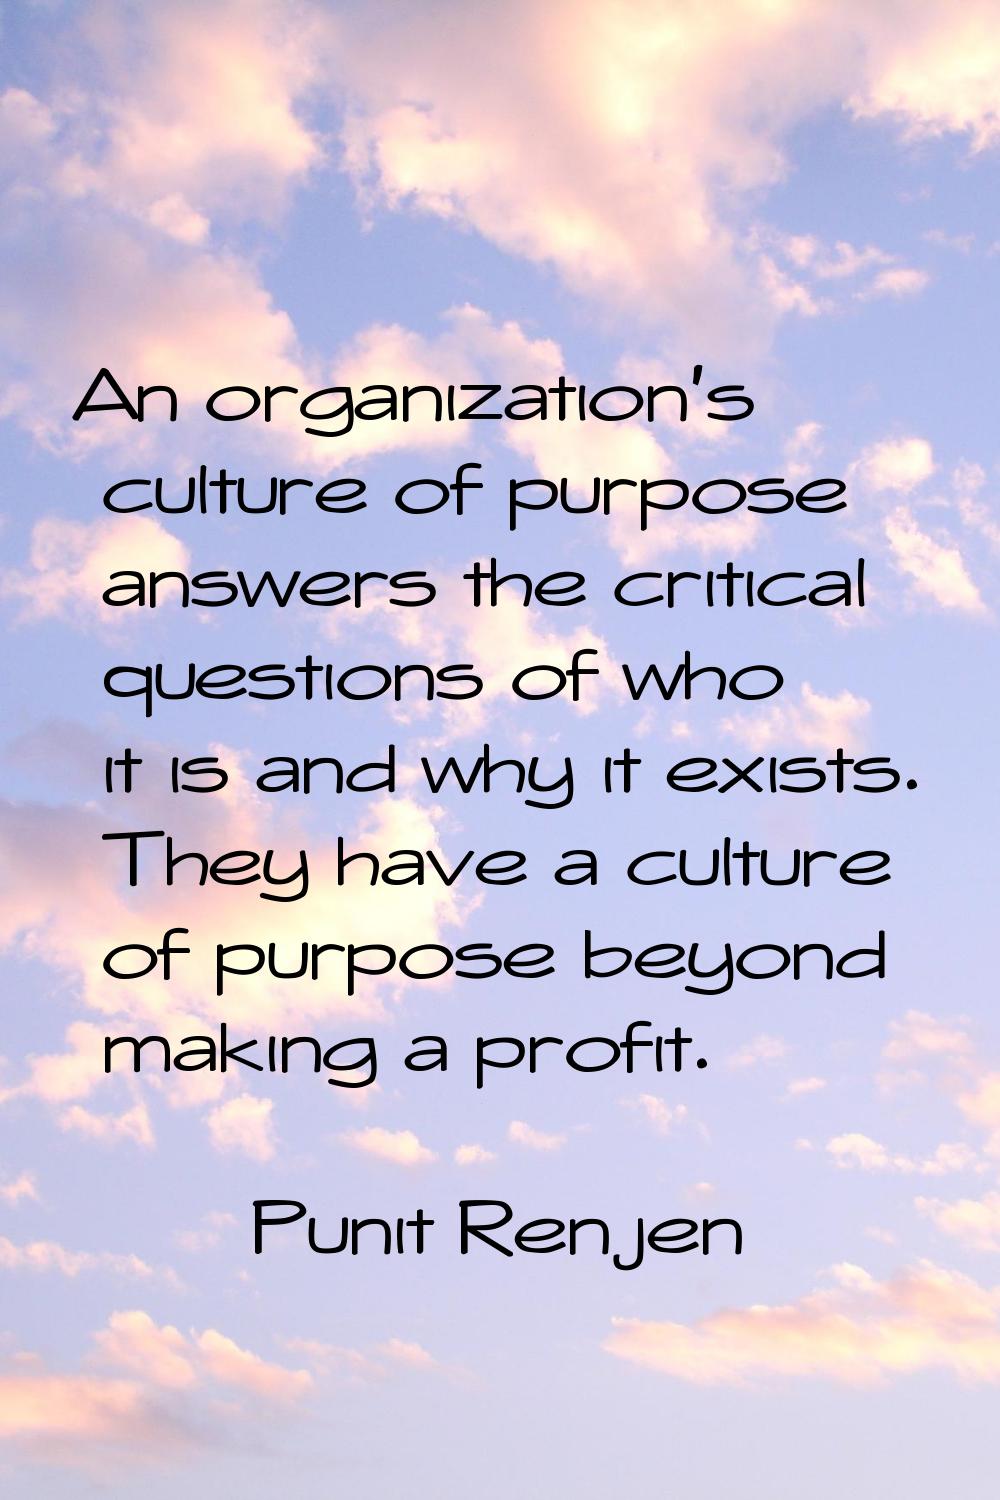 An organization's culture of purpose answers the critical questions of who it is and why it exists.